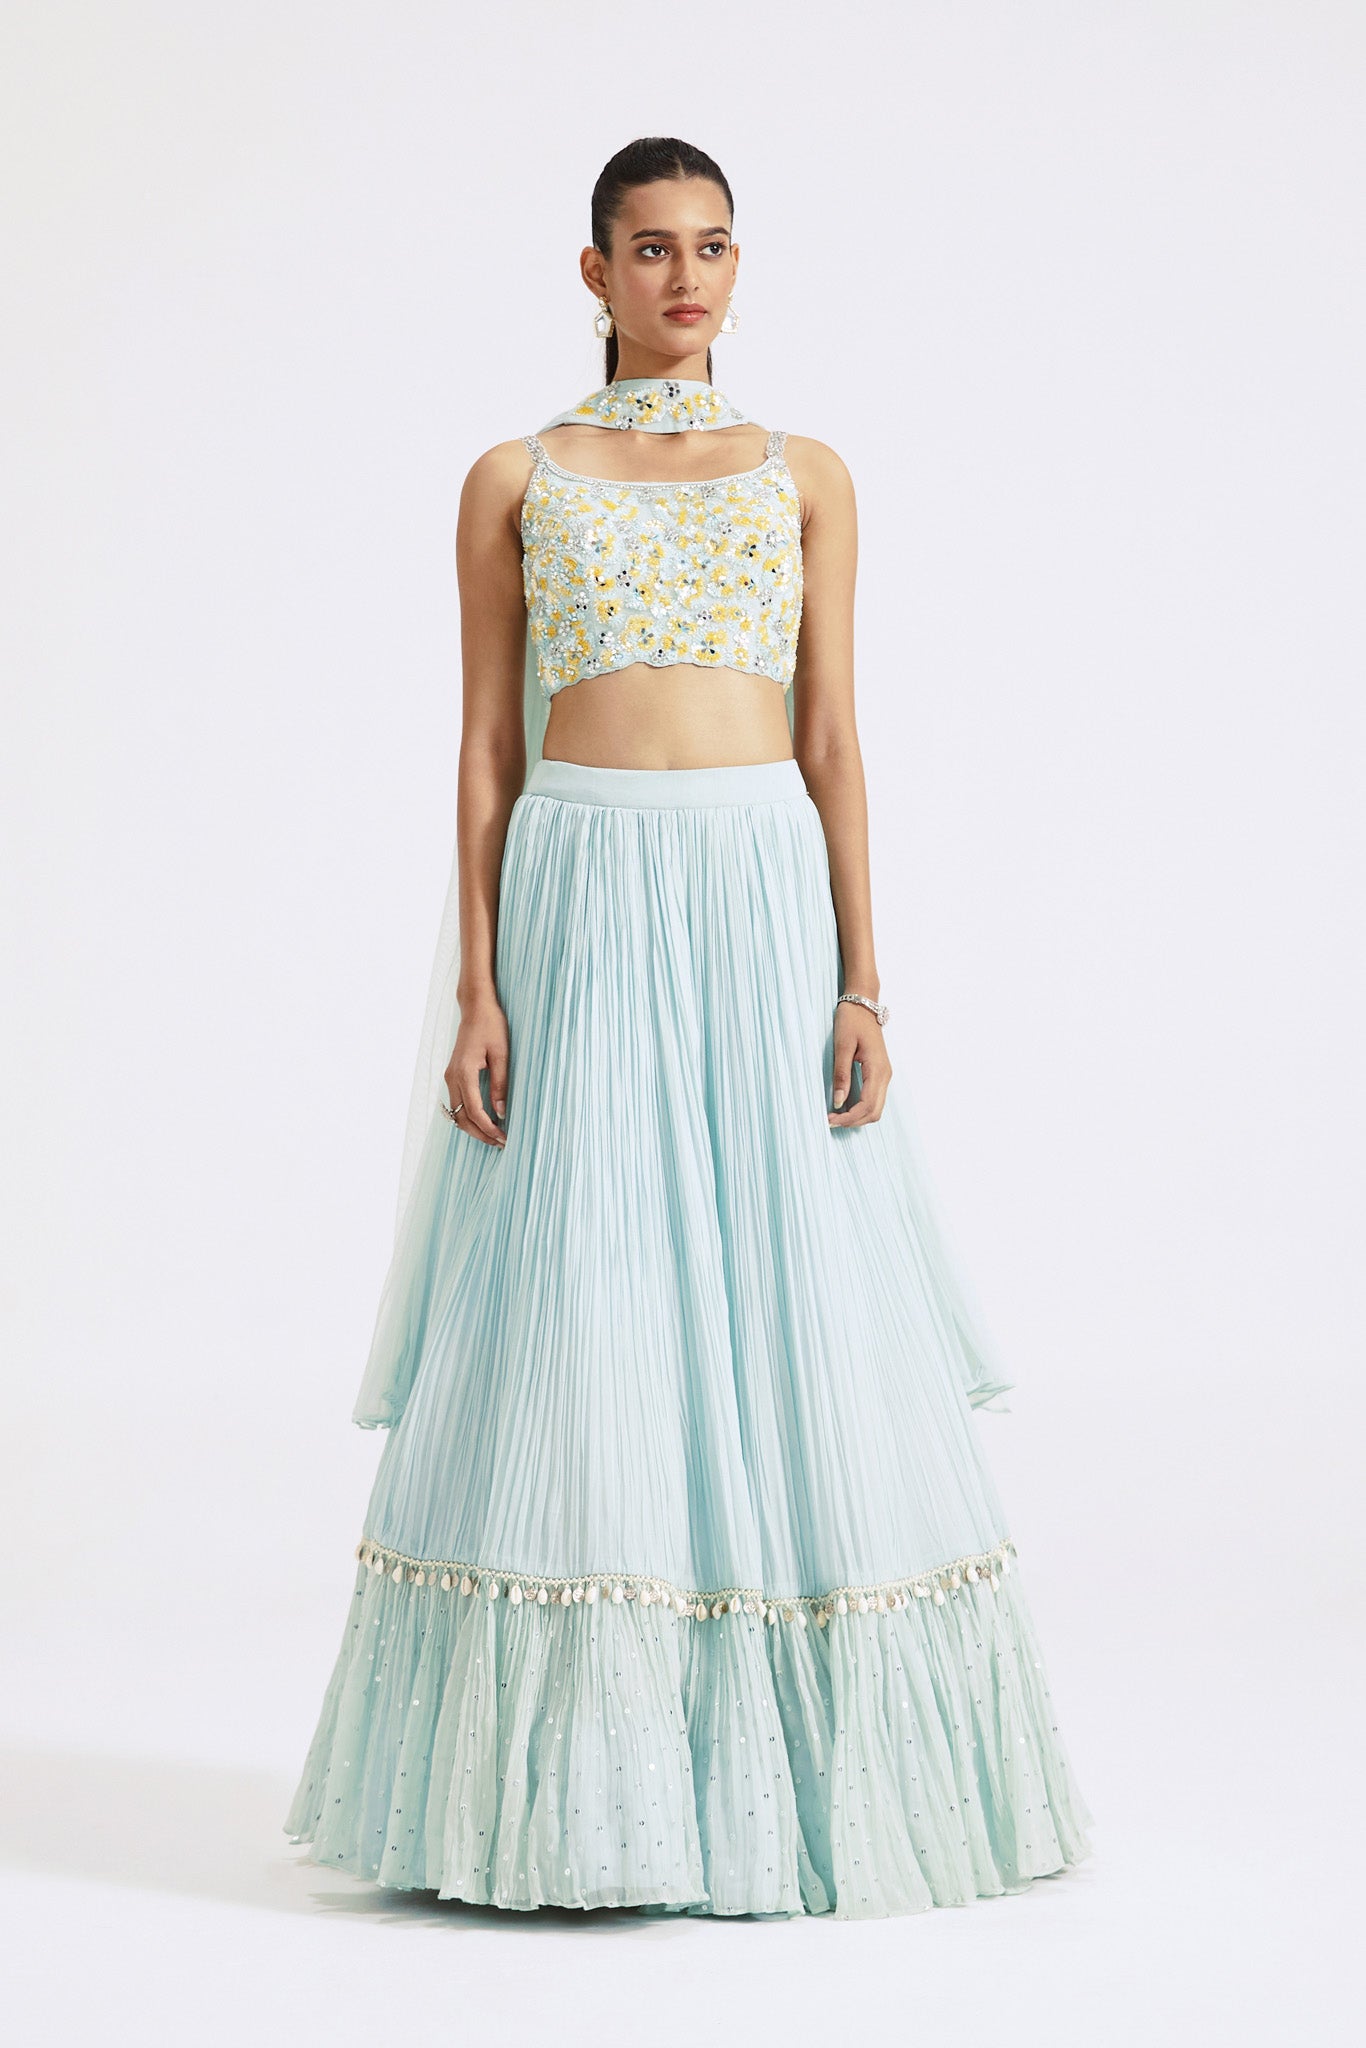 Buy beautiful powder blue embellished georgette lehenga online in USA with dupatta. Shop the best and latest designs in embroidered sarees, designer sarees, Anarkali suit, lehengas, sharara suits for weddings and special occasions from Pure Elegance Indian fashion store in USA.-full view